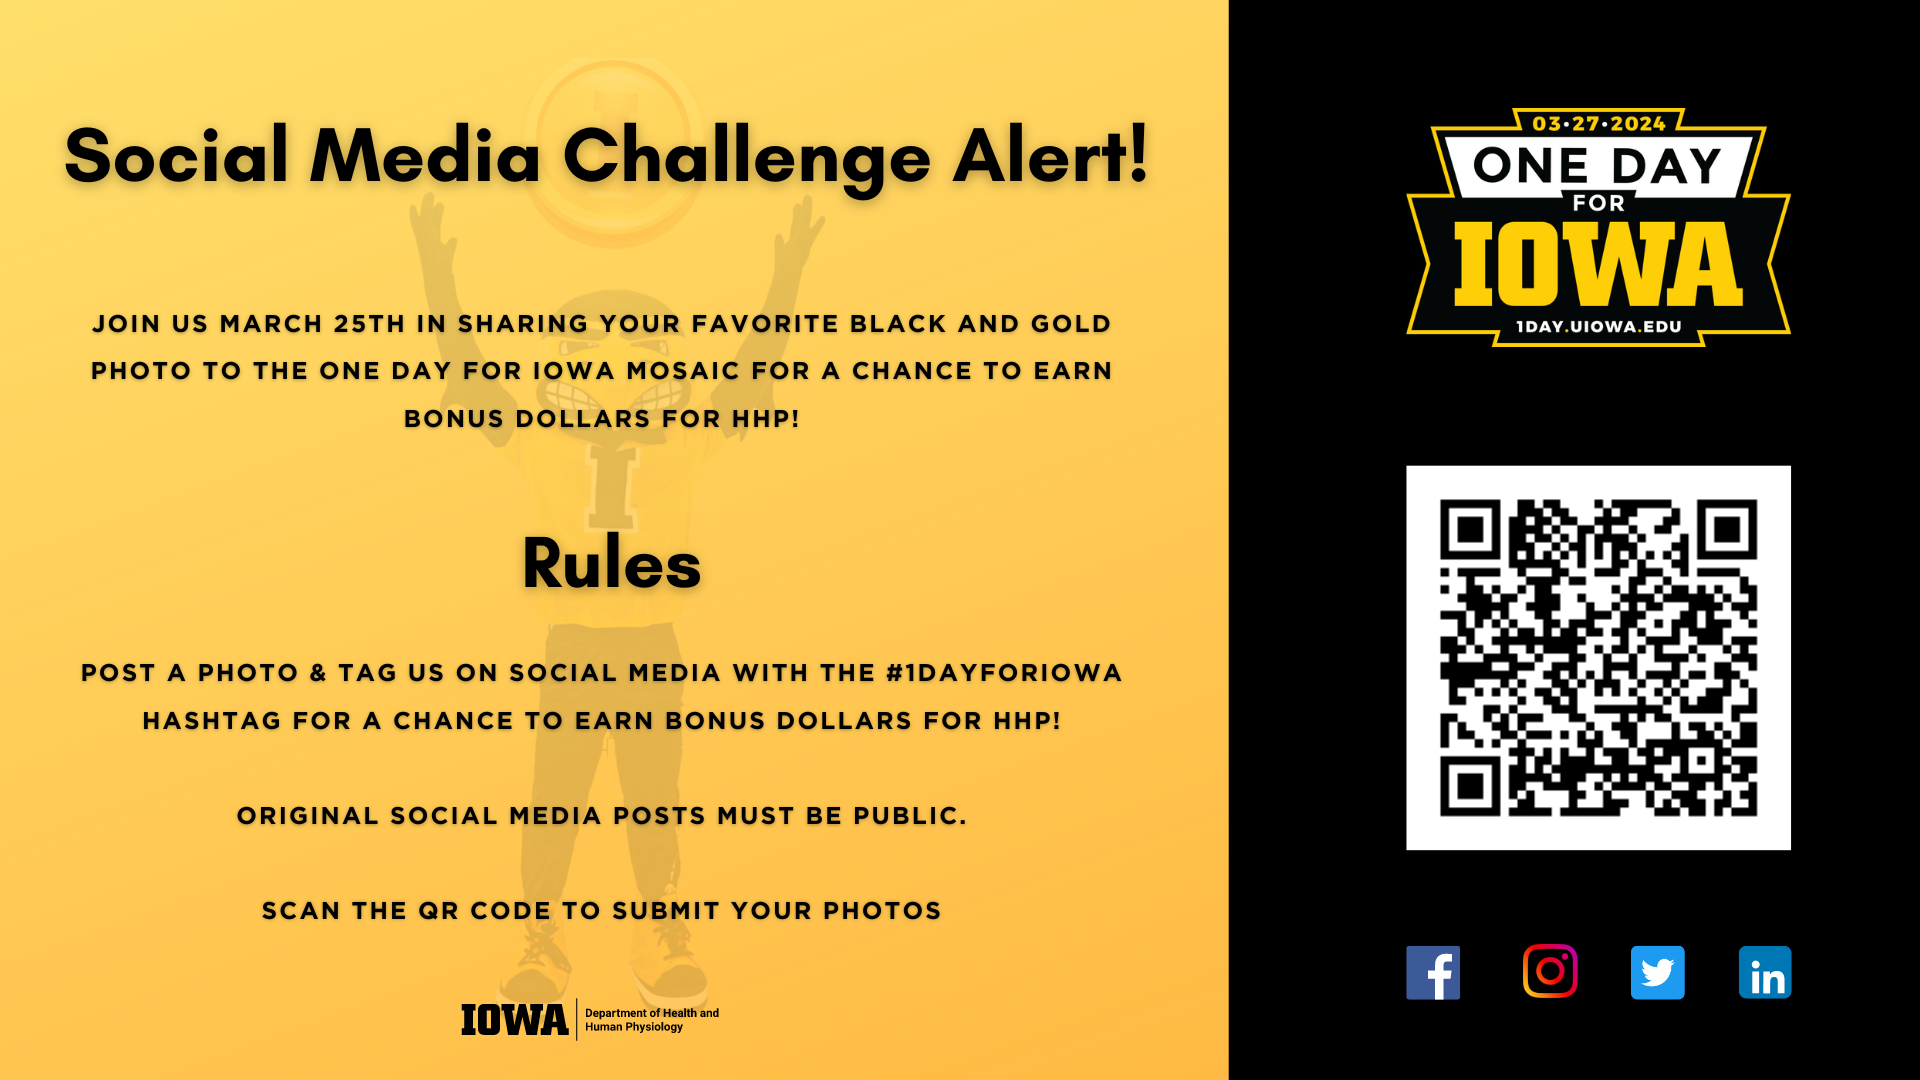 Join us in One Day for Iowa social media challenge!